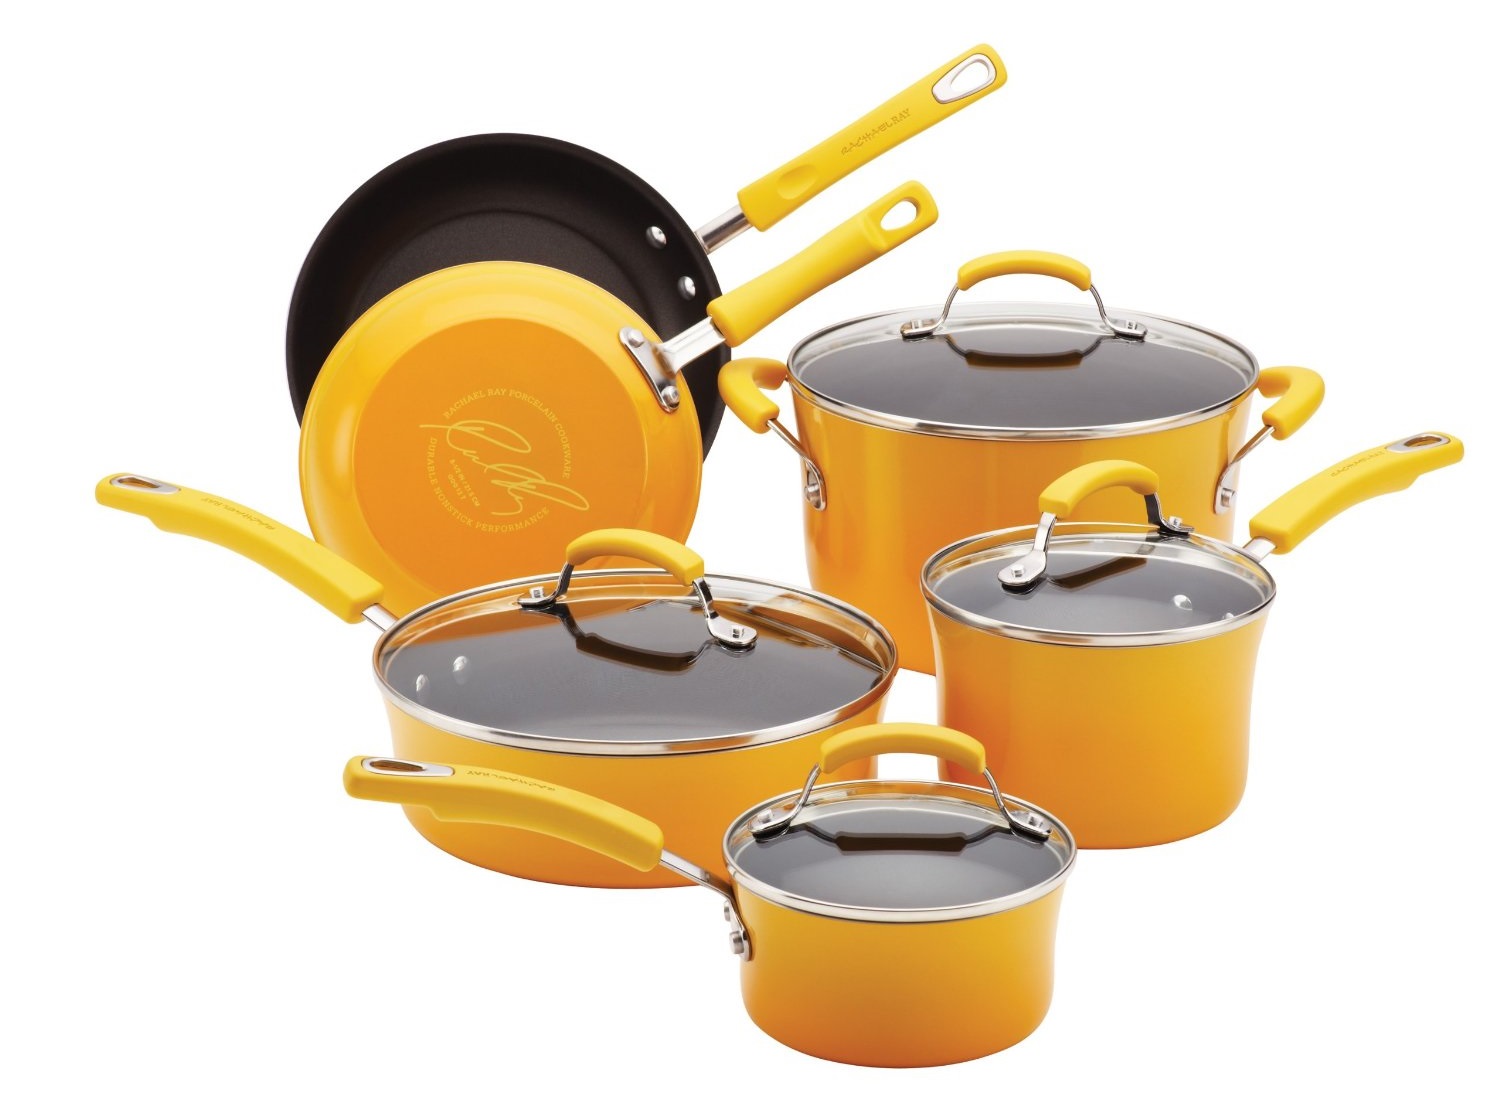 Is Rachael Ray Cookware Good Quality